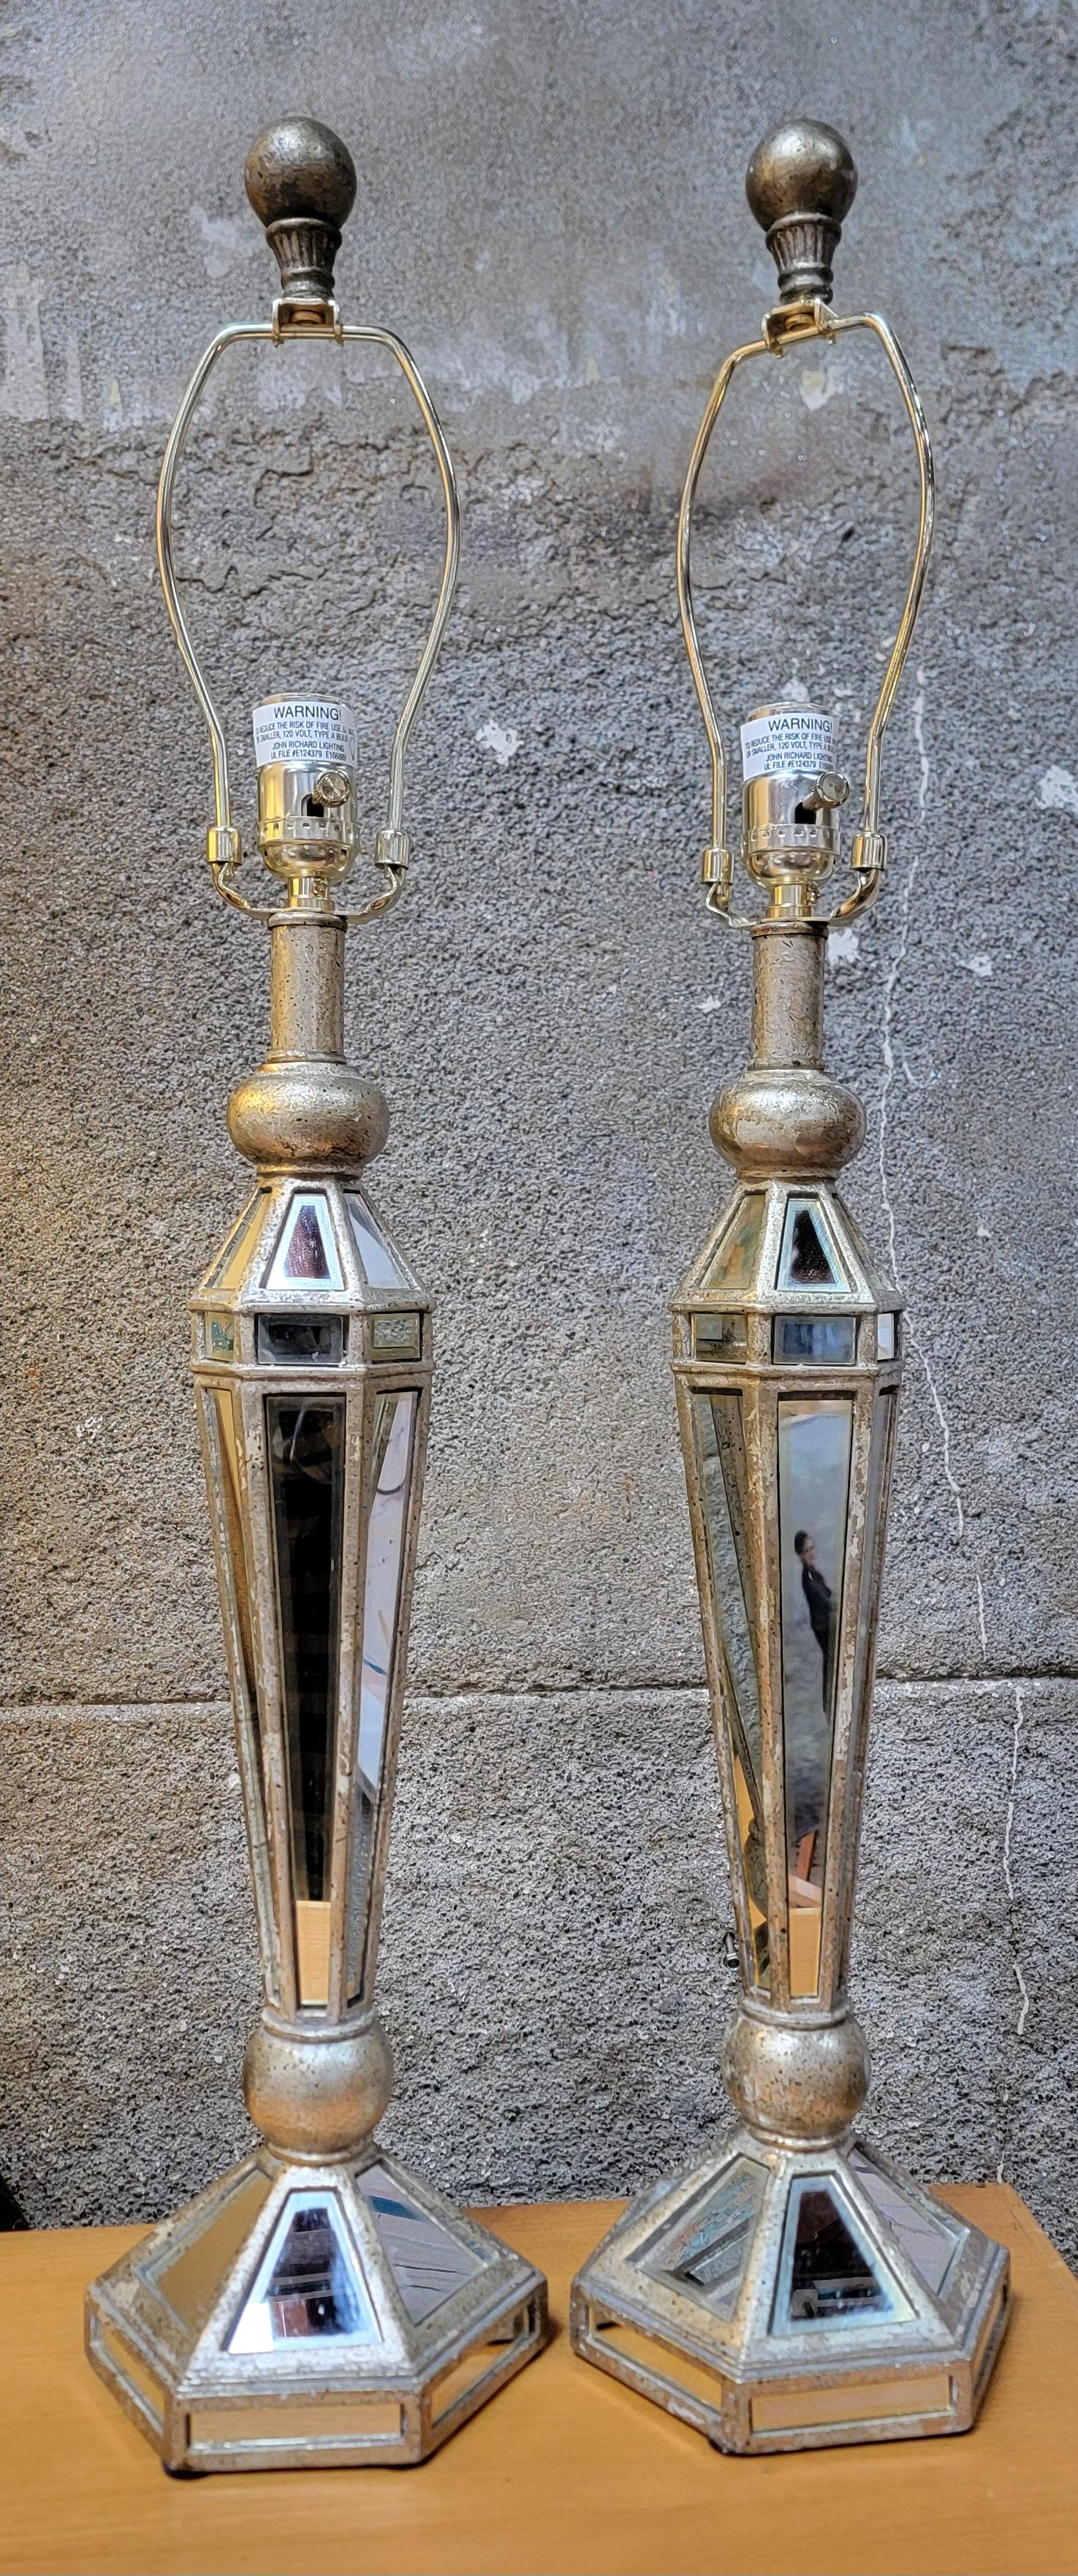 Mirrored Hollywood Regency Table Lamps by John Richard Lighting In Good Condition For Sale In Fulton, CA